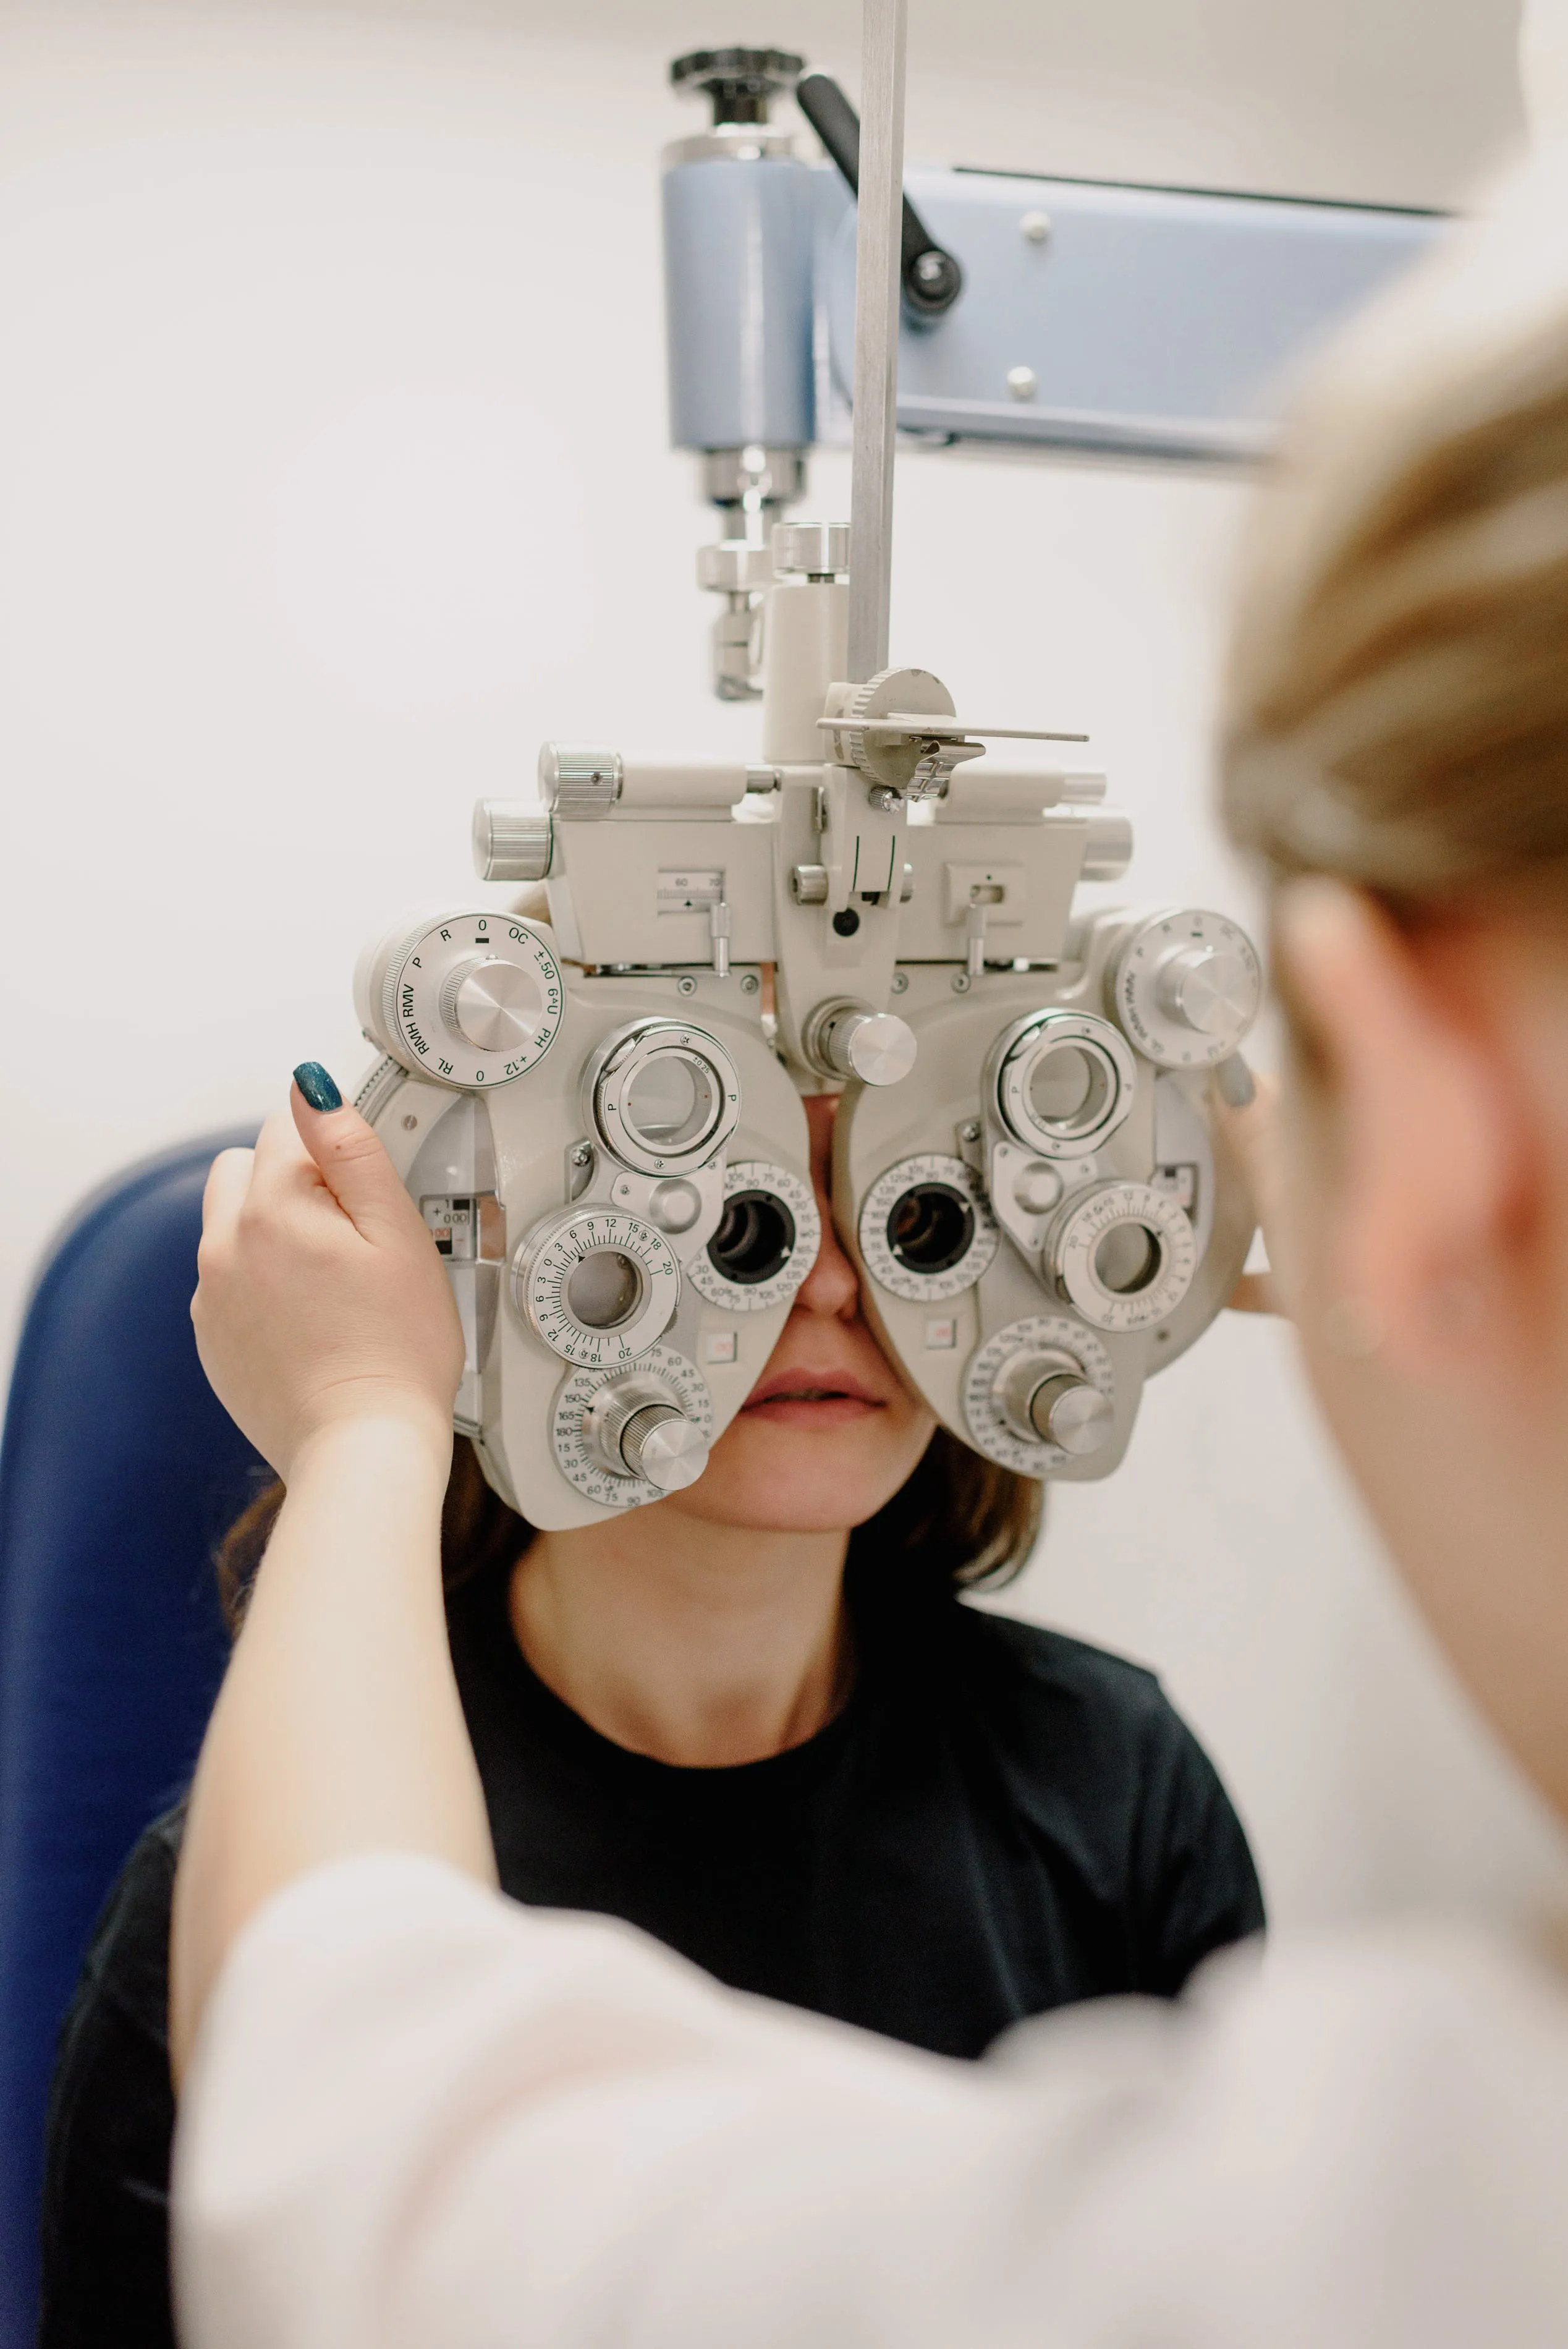 Revolution in Eye Care: Laser Procedure Cures All Vision Impairments